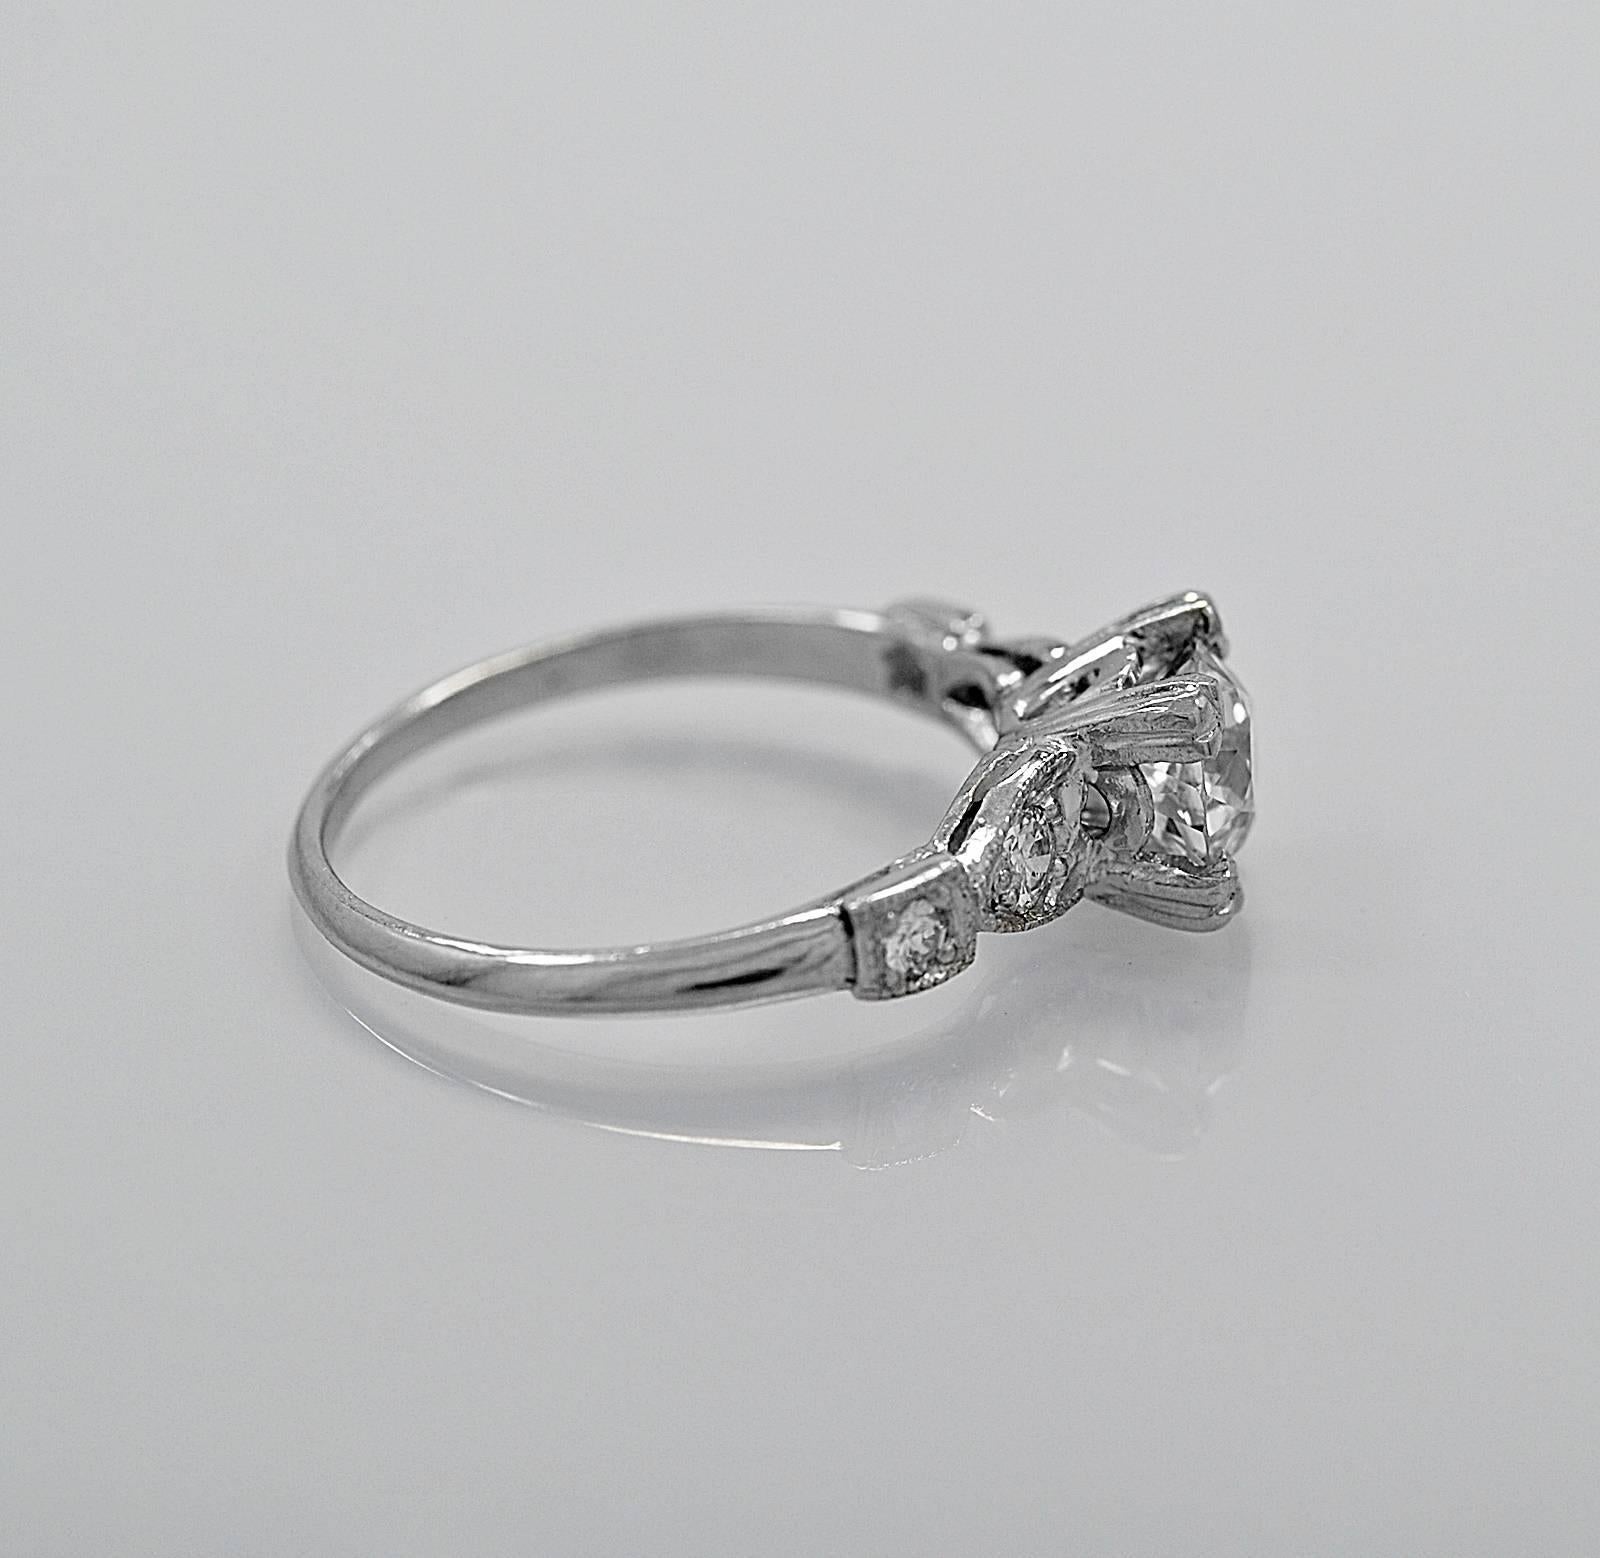 A dazzling Art Deco platinum diamond antique engagement ring featuring 1.00ct. apx. European cut diamond with I1 clarity (100% Eye Clean) and G color. The center diamond is set with trefoil prongs and the diamonds on the side are set in a heart